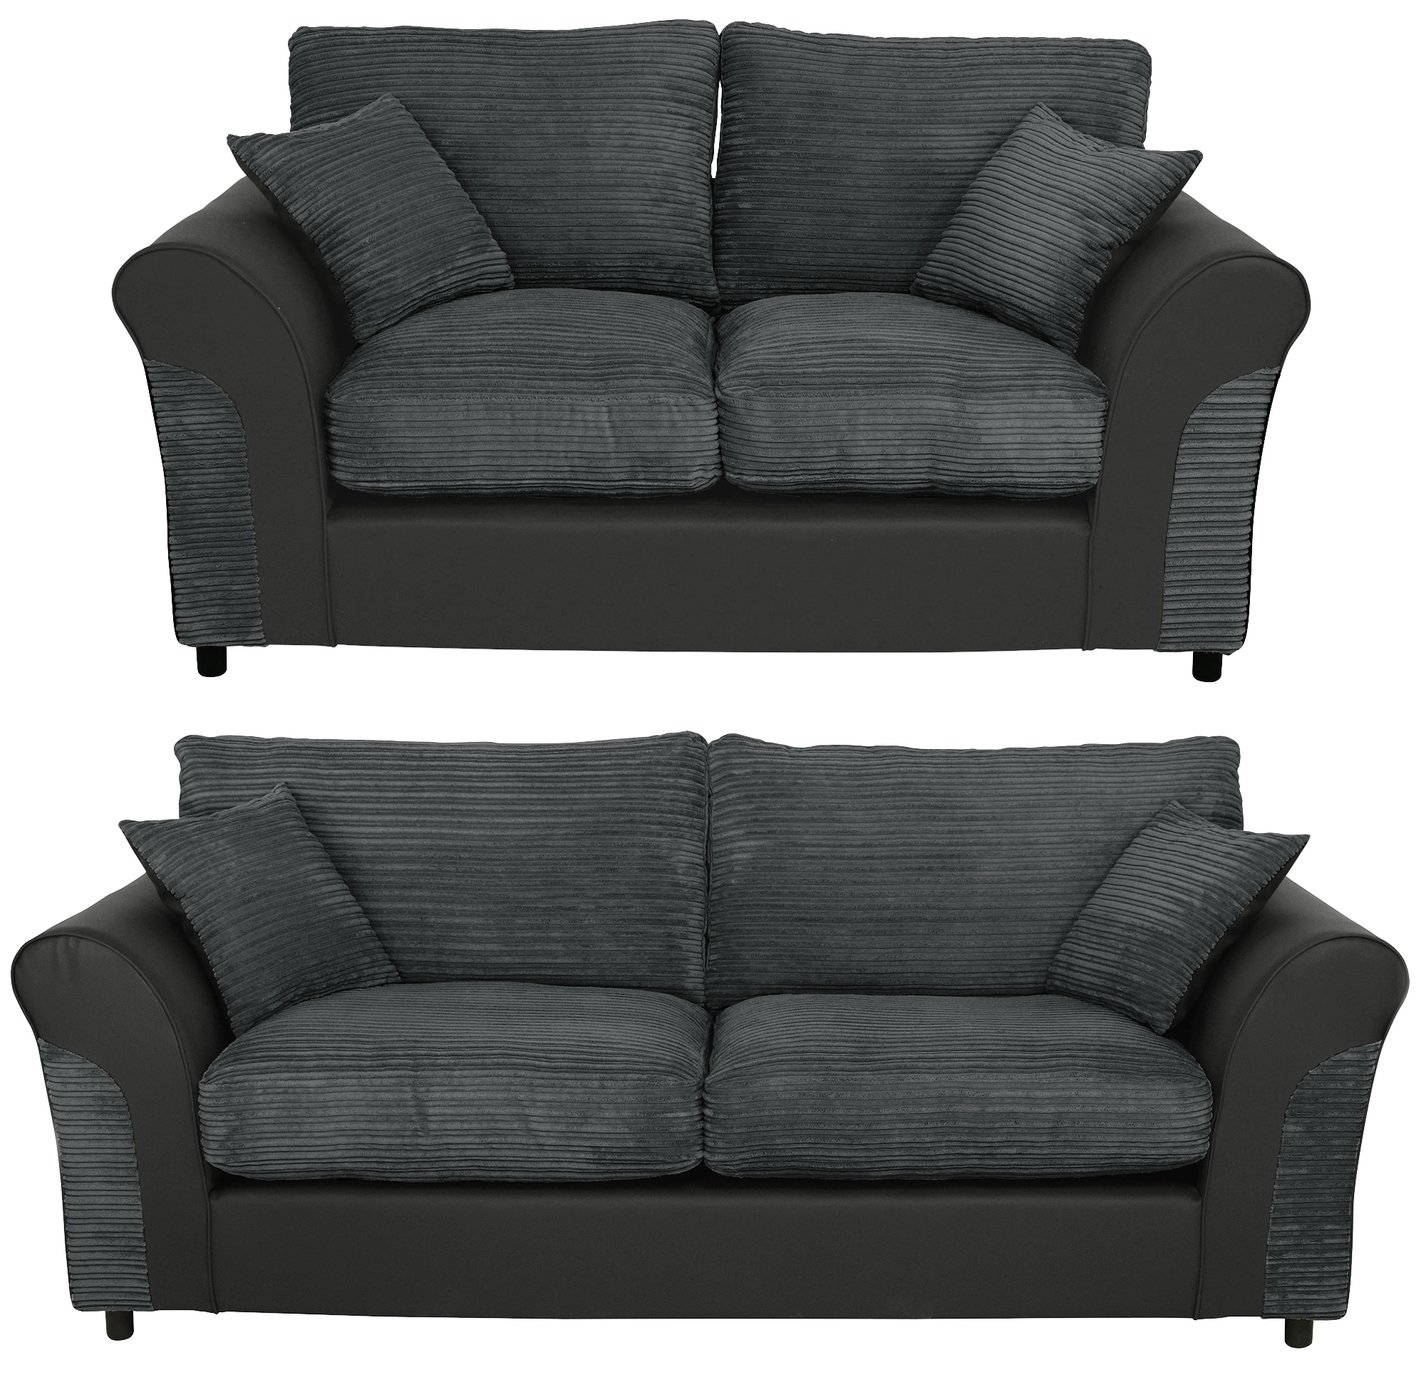 Argos Home Harry Fabric 2 Seater & 3 Seater Sofa review